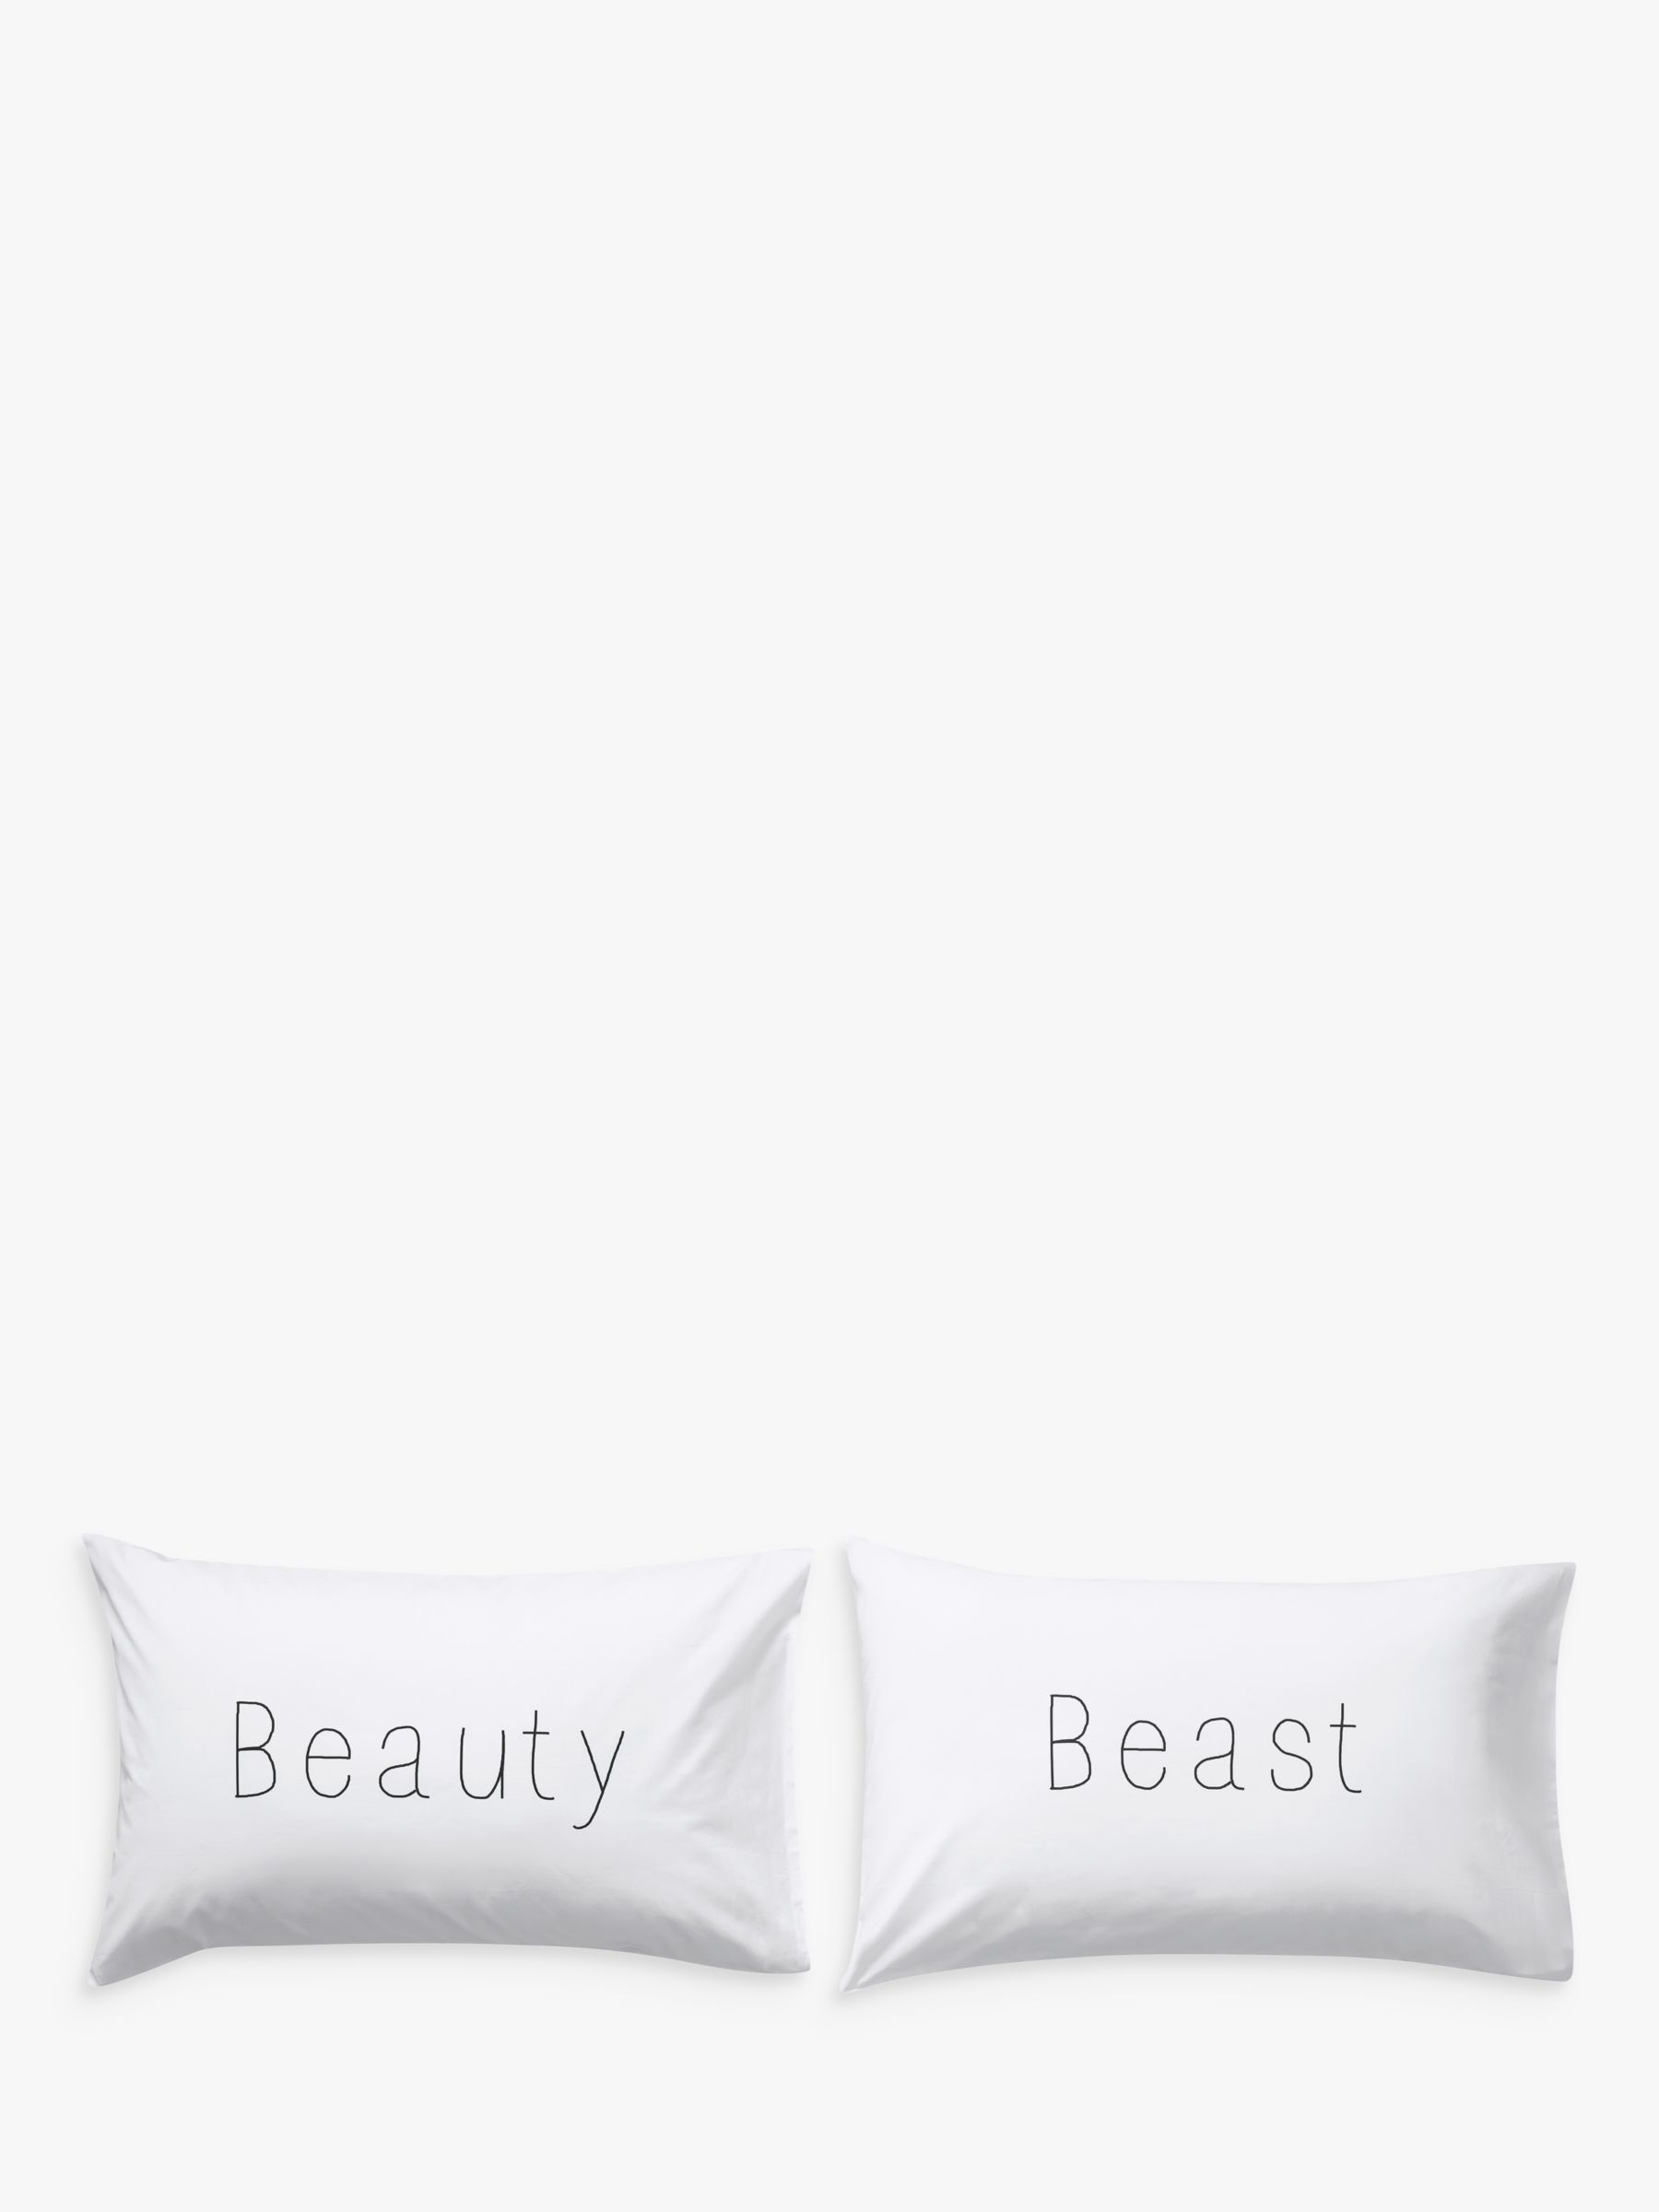 Home Furniture Diy Beauty And The Beast Themed Pillowcase Set